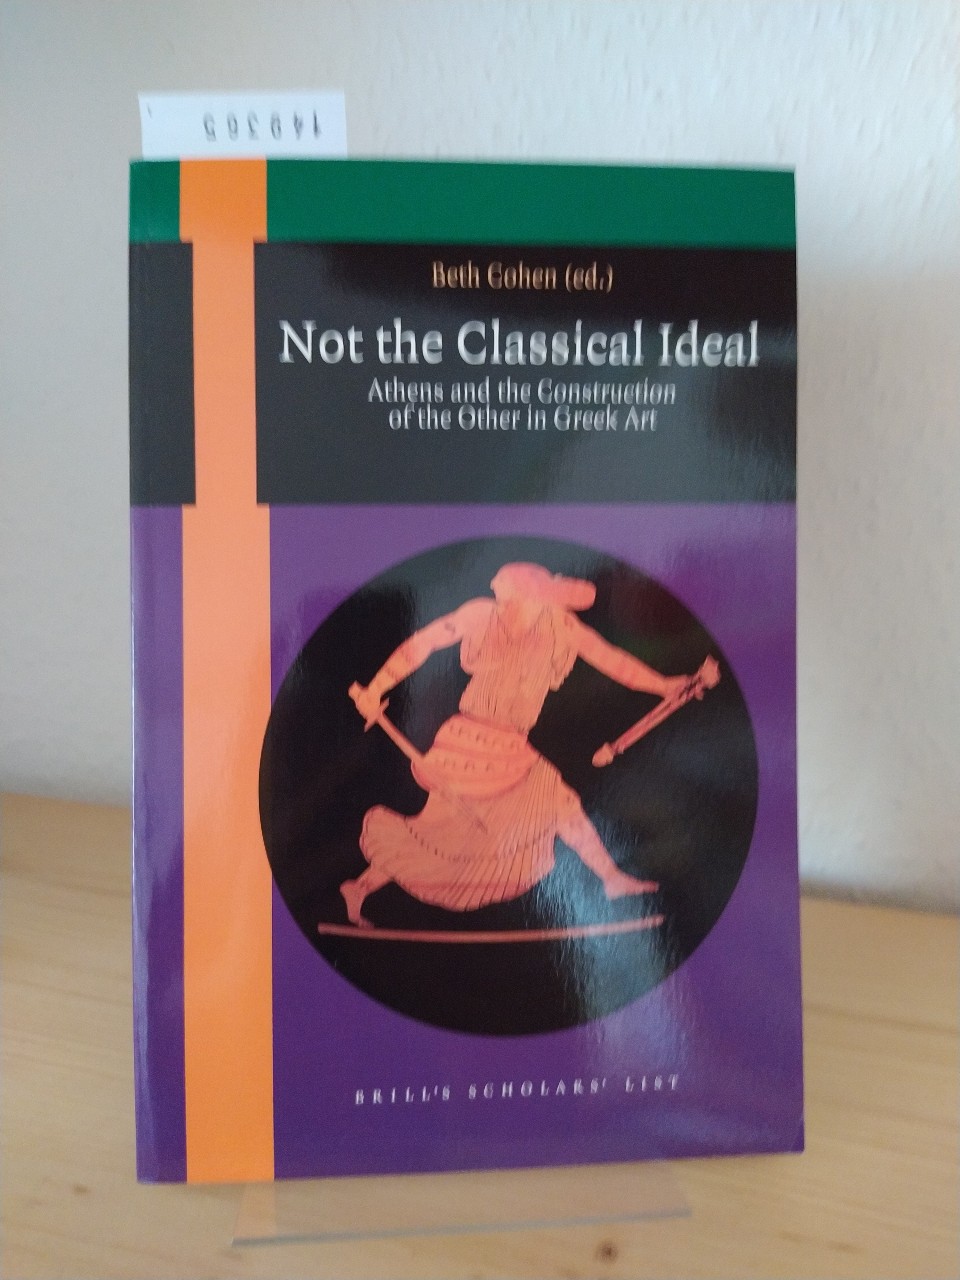 Not the classical ideal. Athens and the construction of the other in Greek Art. [Edited by Beth Cohen]. (= Brill's scholars' list). - Cohen, Beth (Ed.)